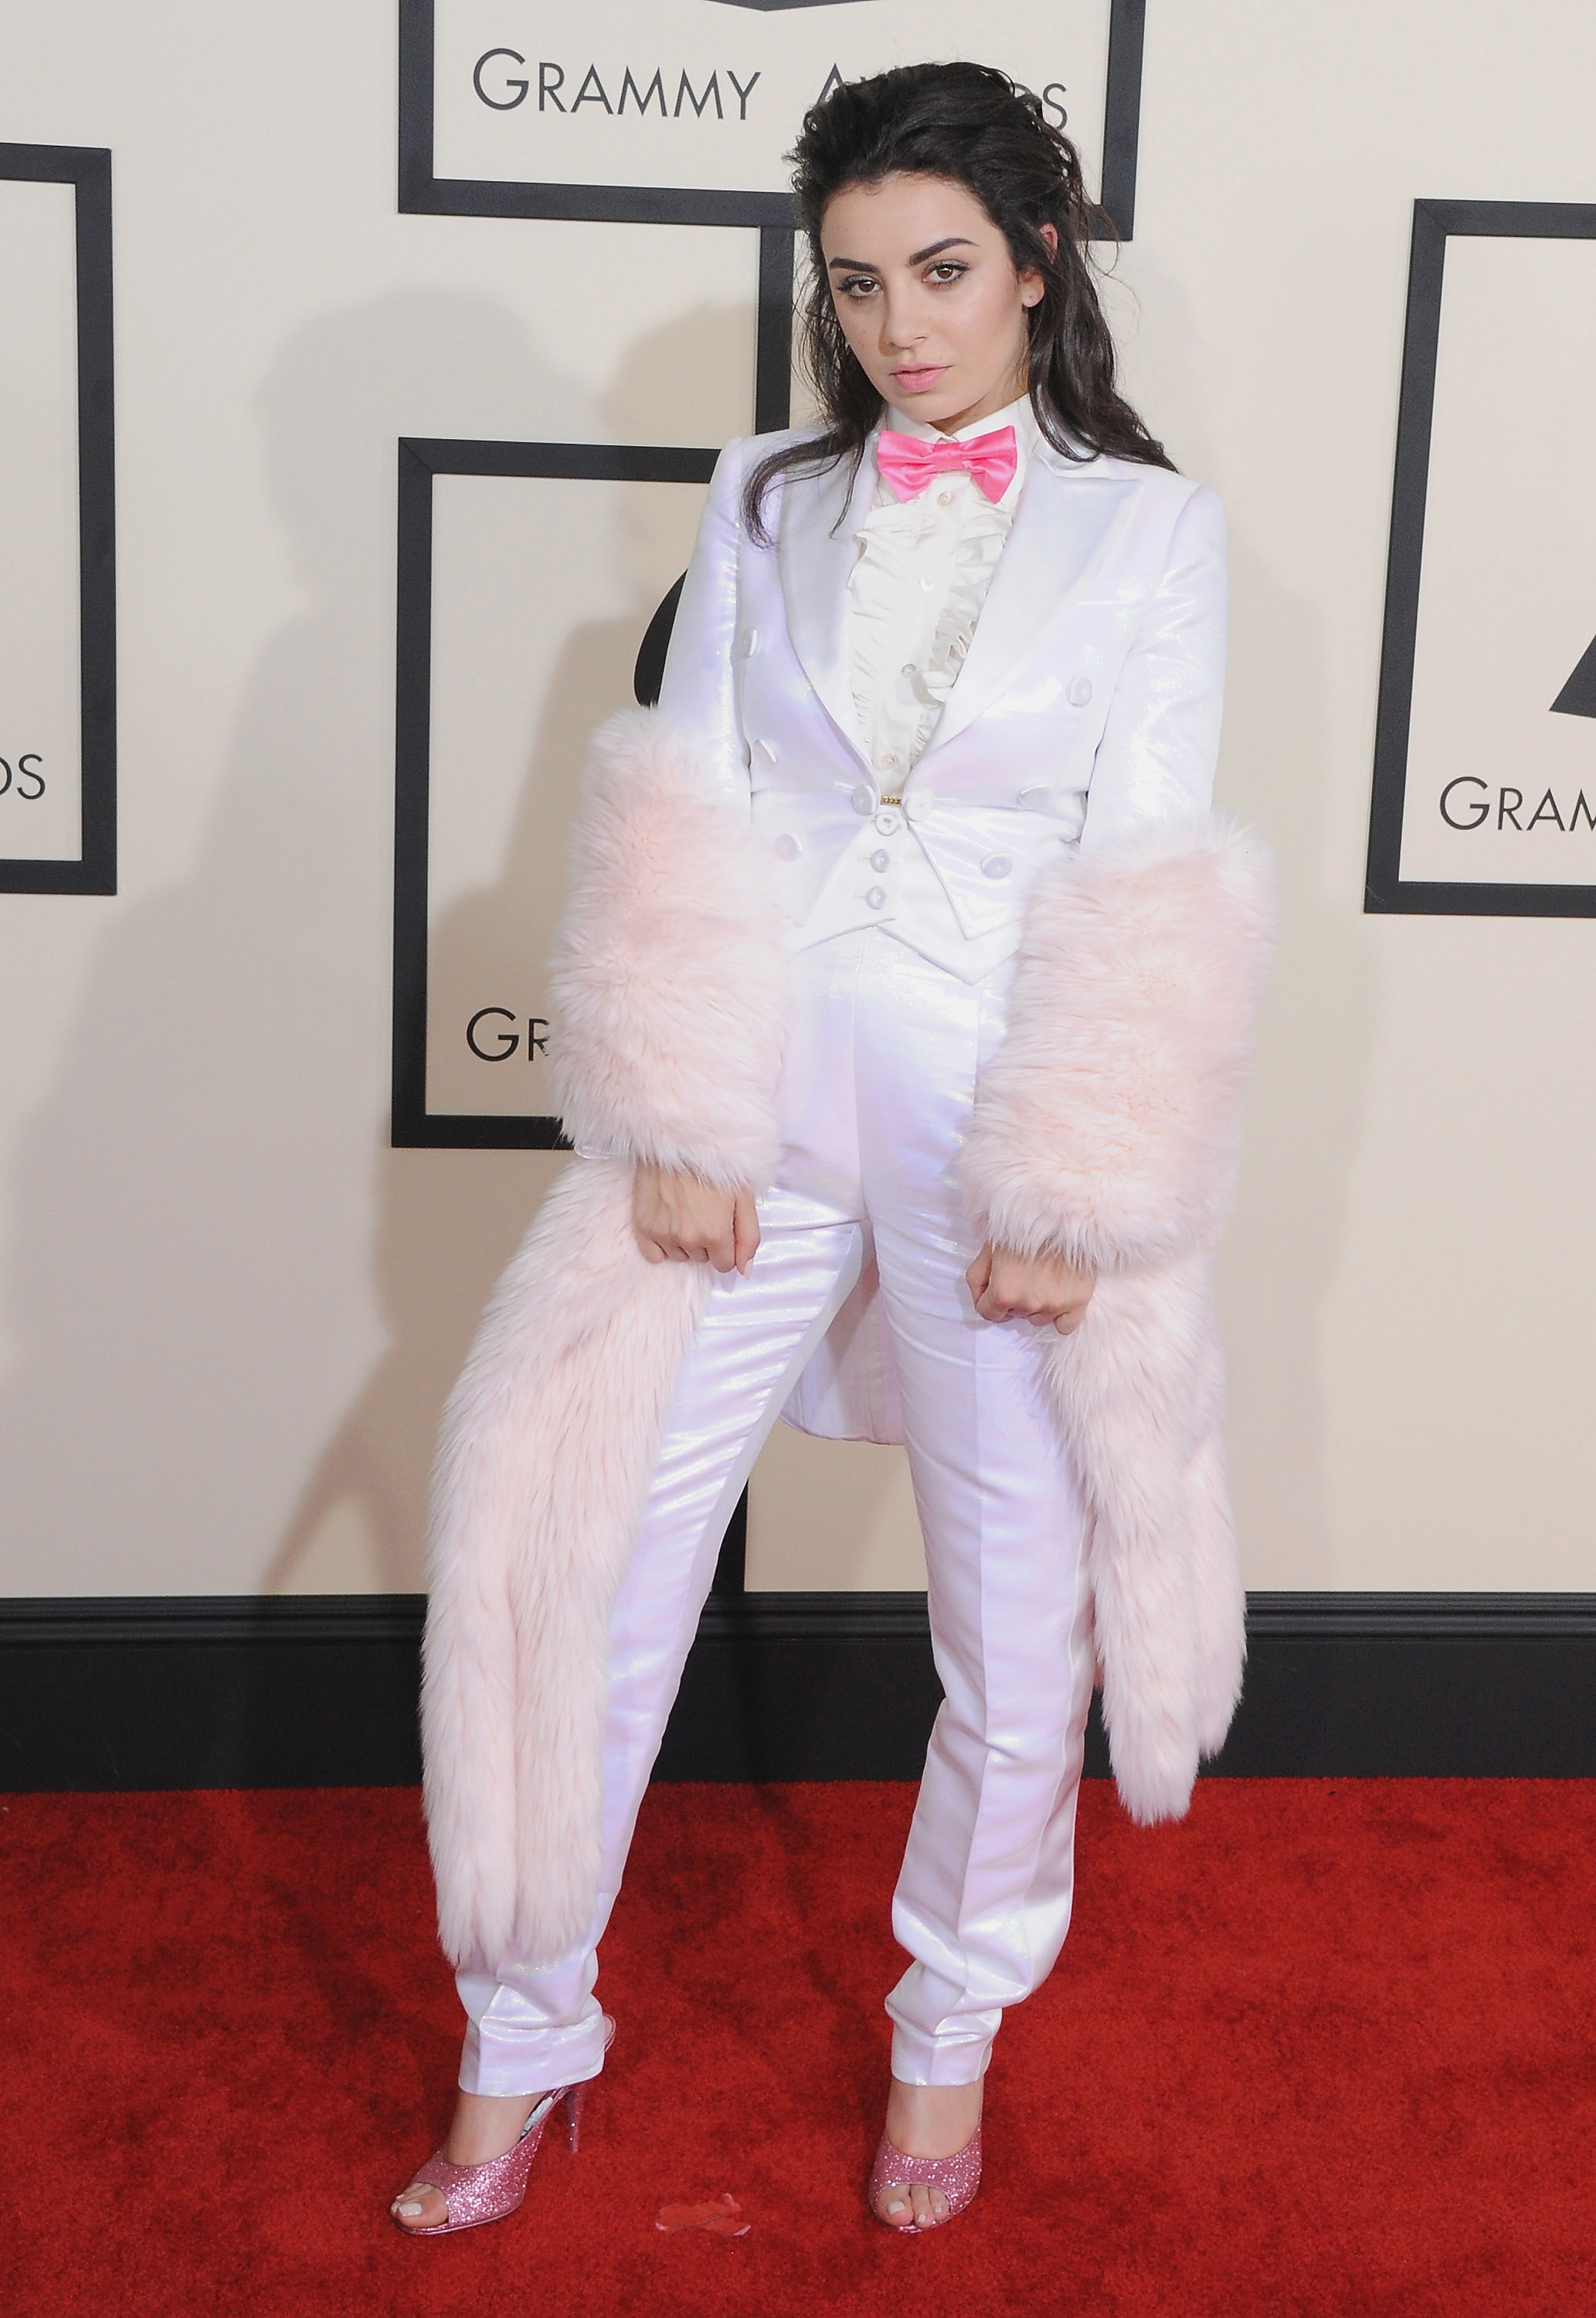 Singer Charli XCX arrives at the 57th GRAMMY Awards at Staples Center. She wears a white tuxedo with frilled chest detail, a pink bow tie, pink peeptoe heels and a white furry coat.